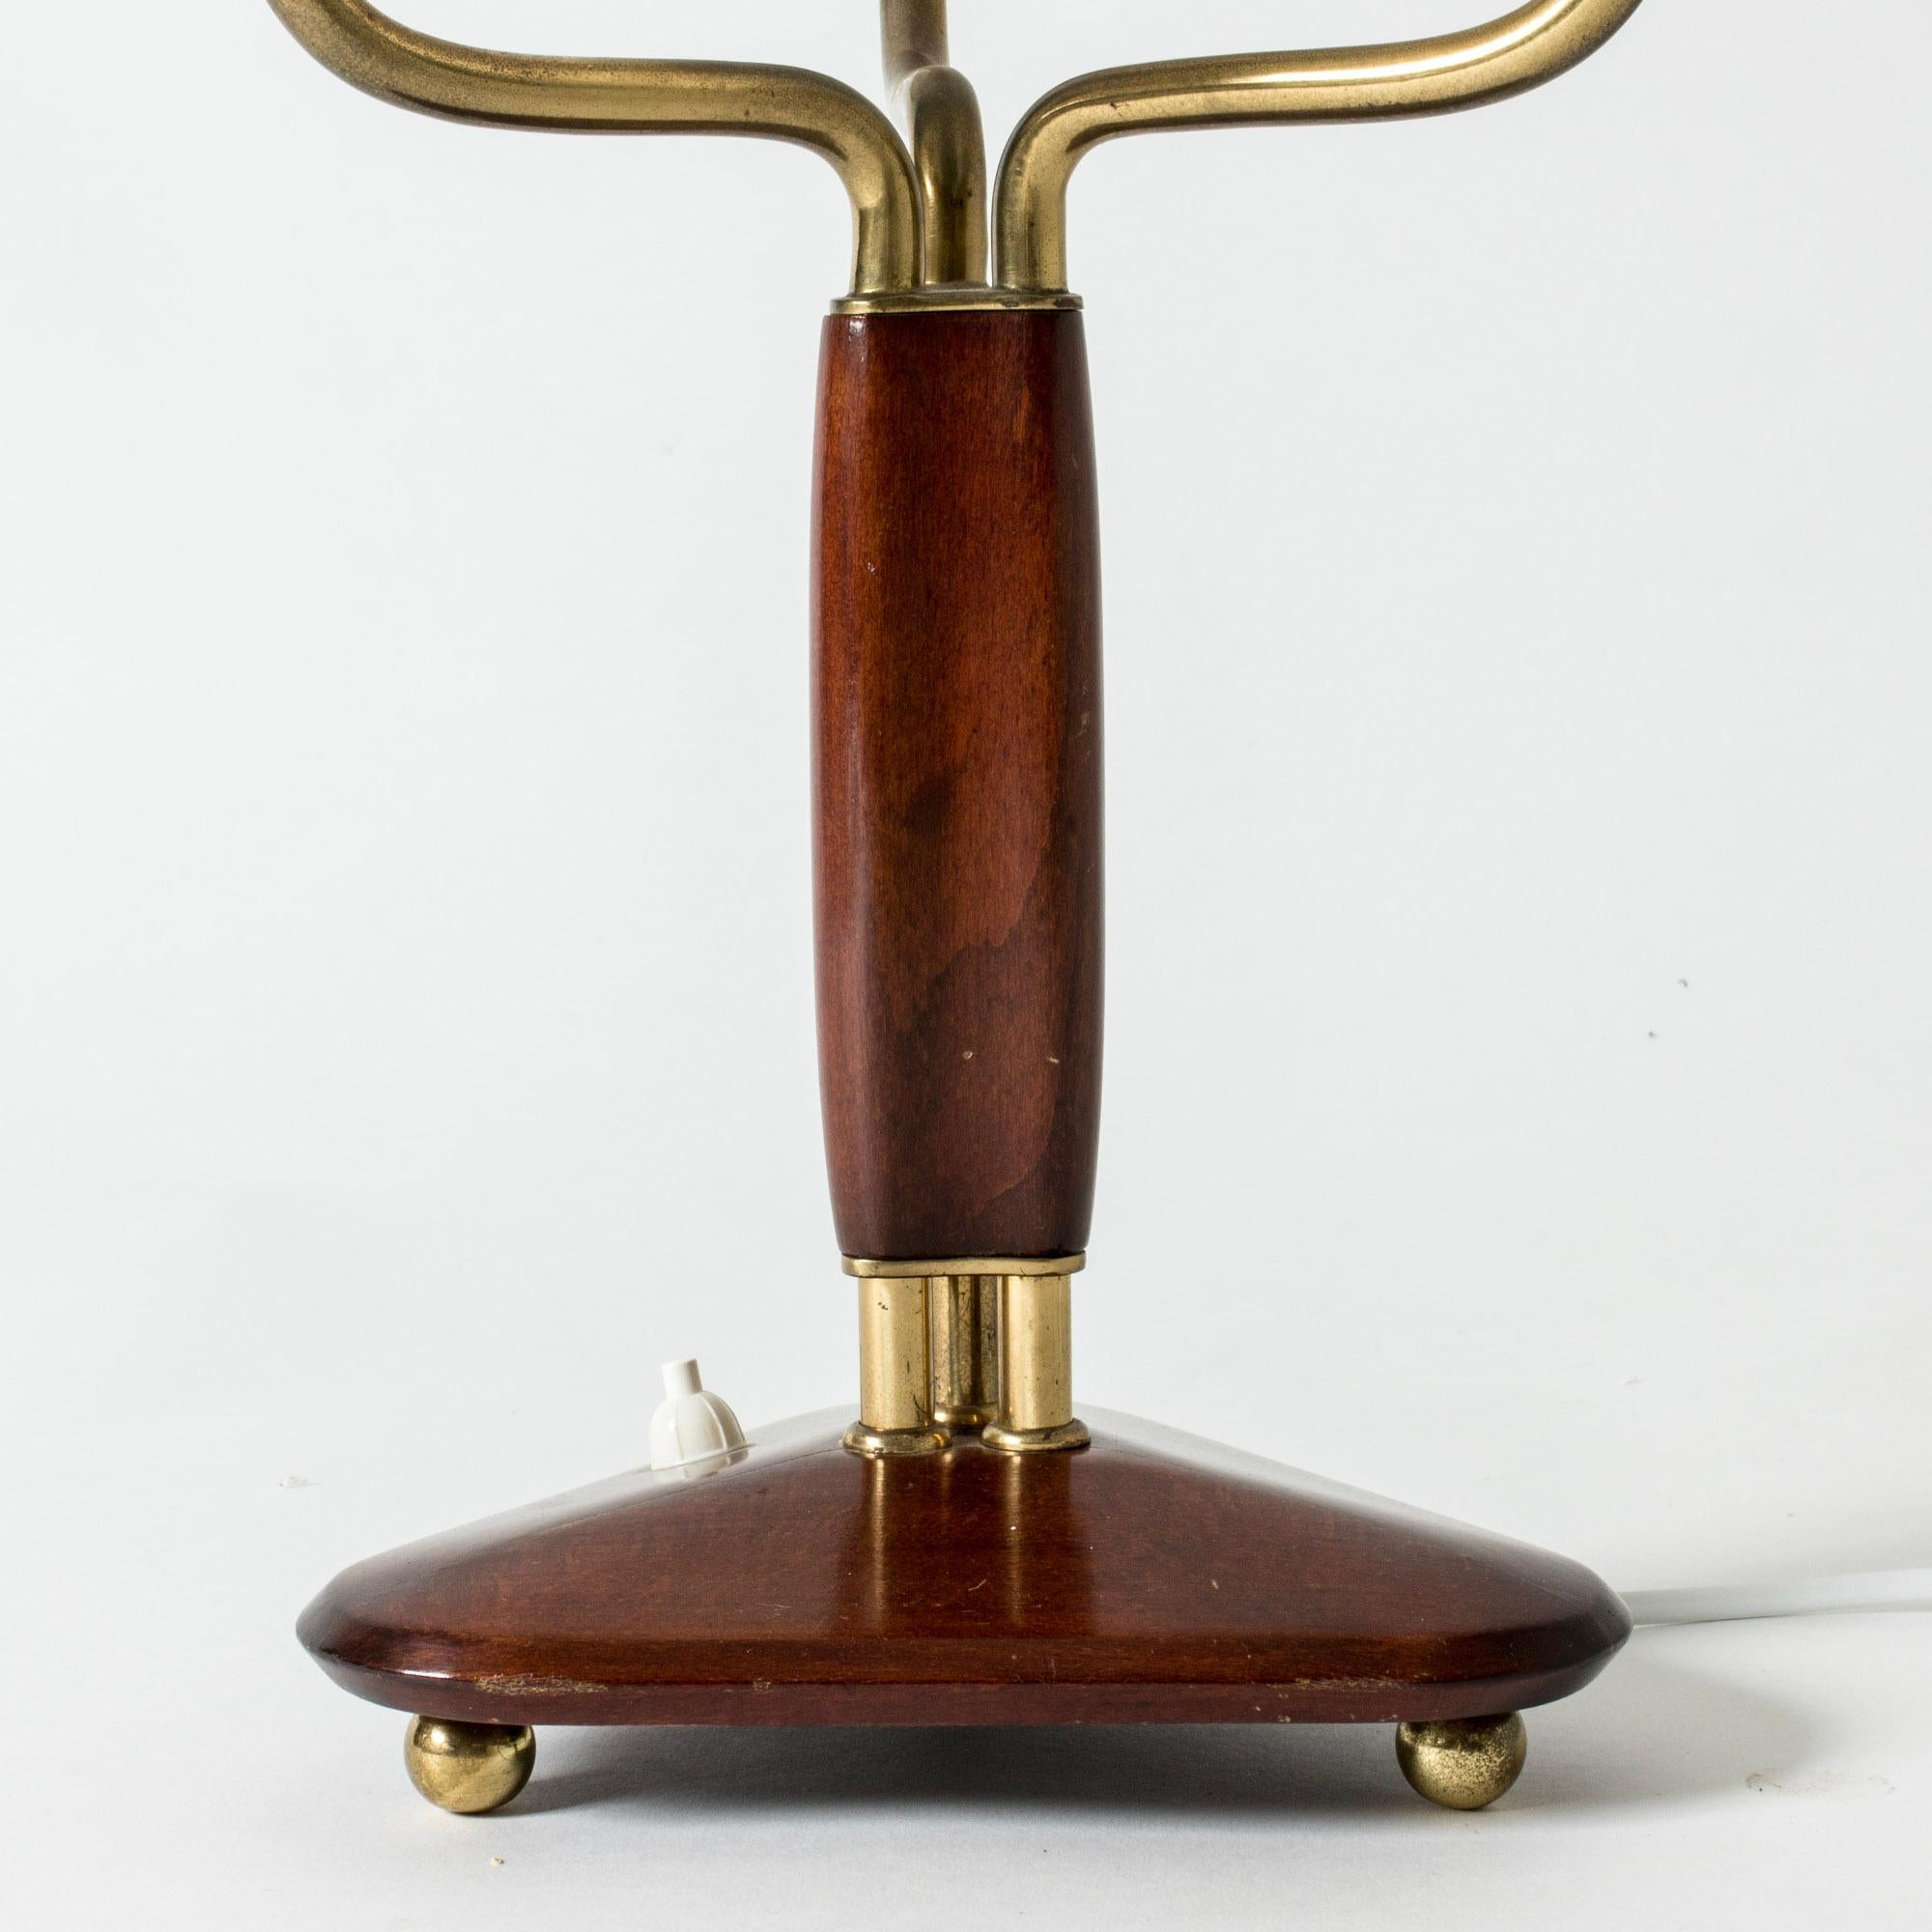 Elegant mahogany table lamp by Carl-Axel Acking, with three brass arms and pleated shades. Triangular base and decorative brass ball feet.